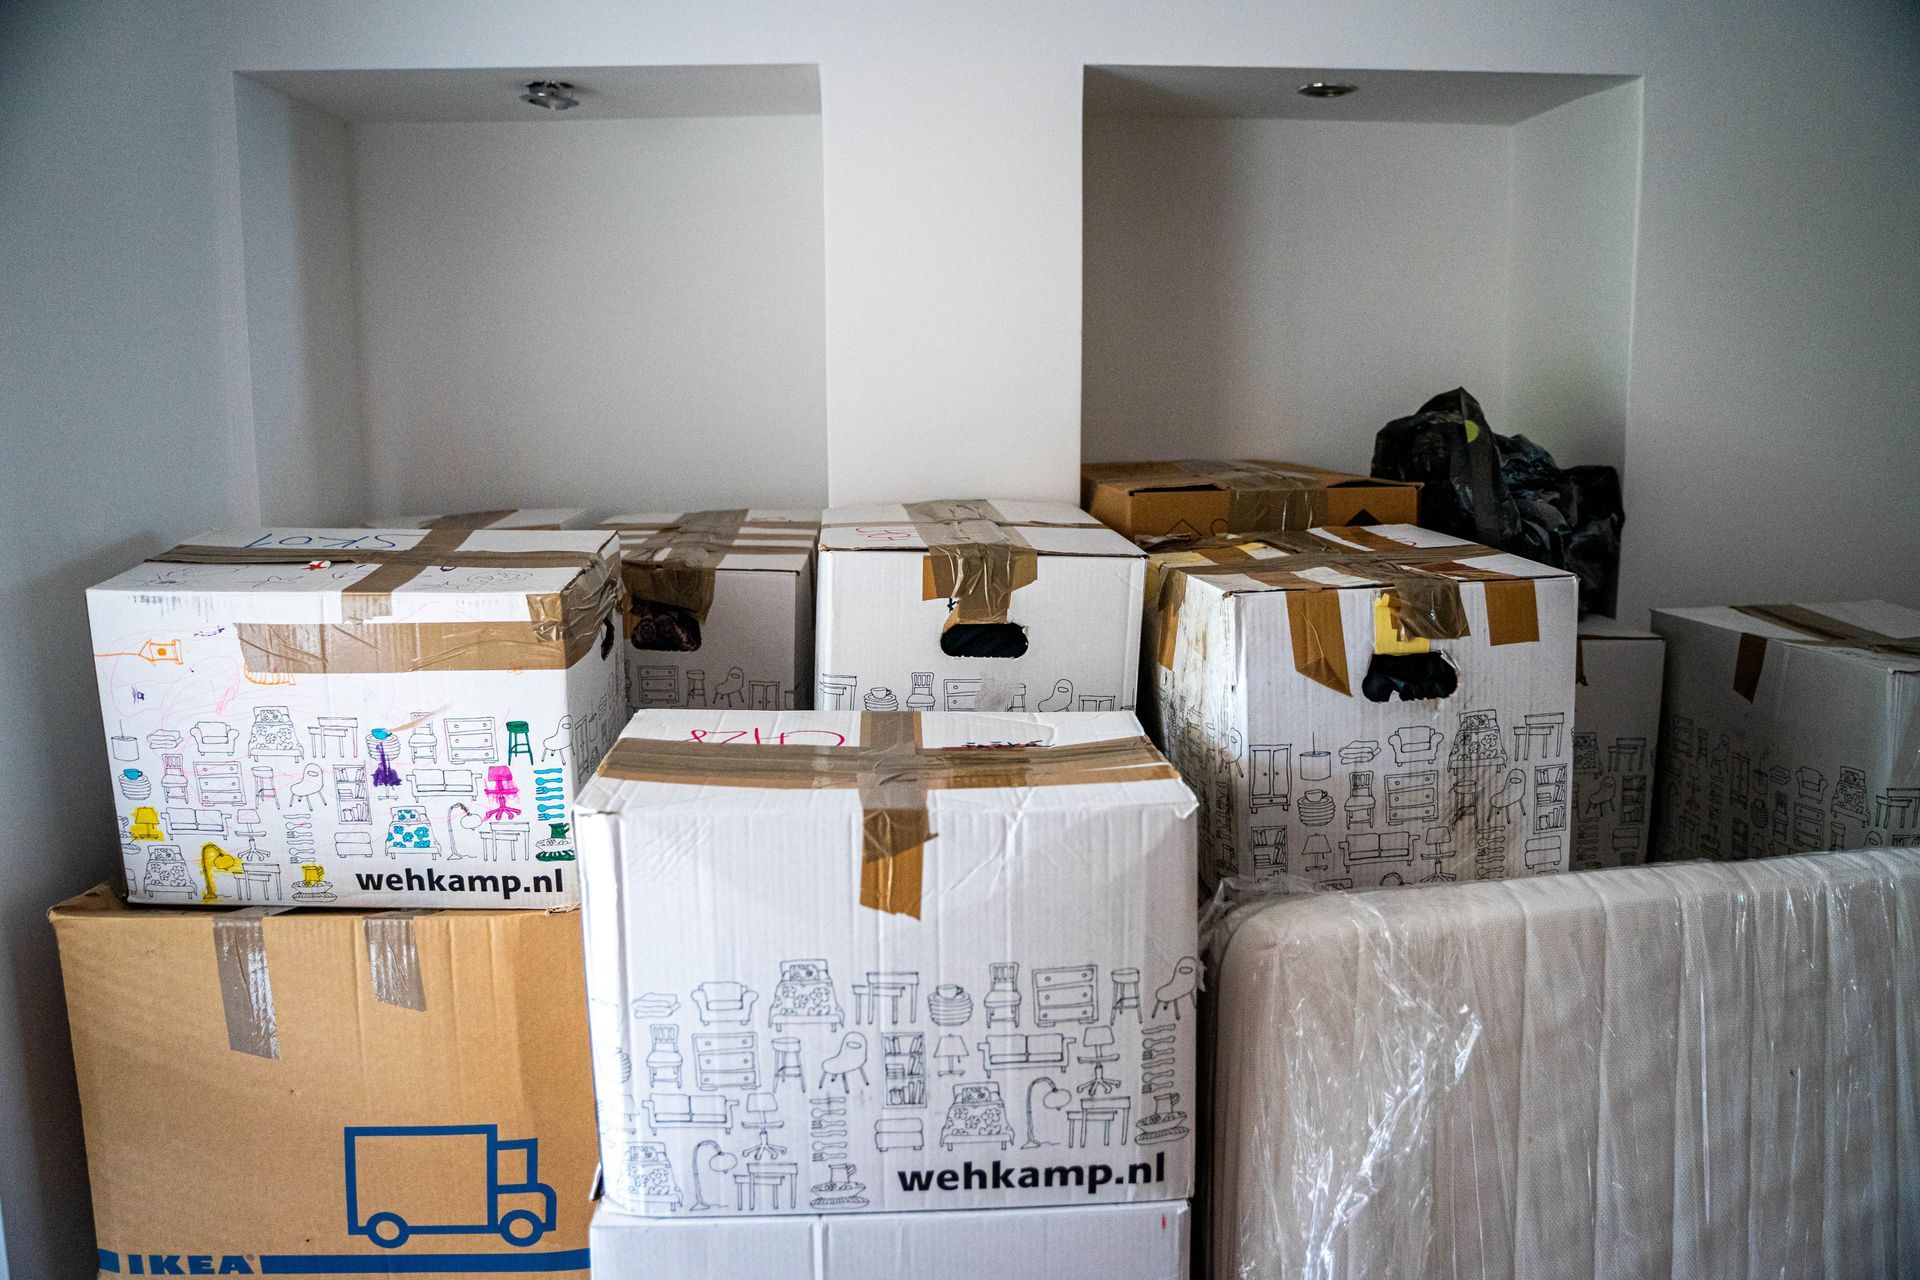 Stack of sturdy cardboard boxes neatly arranged and packed, prepared for a move to a new location.